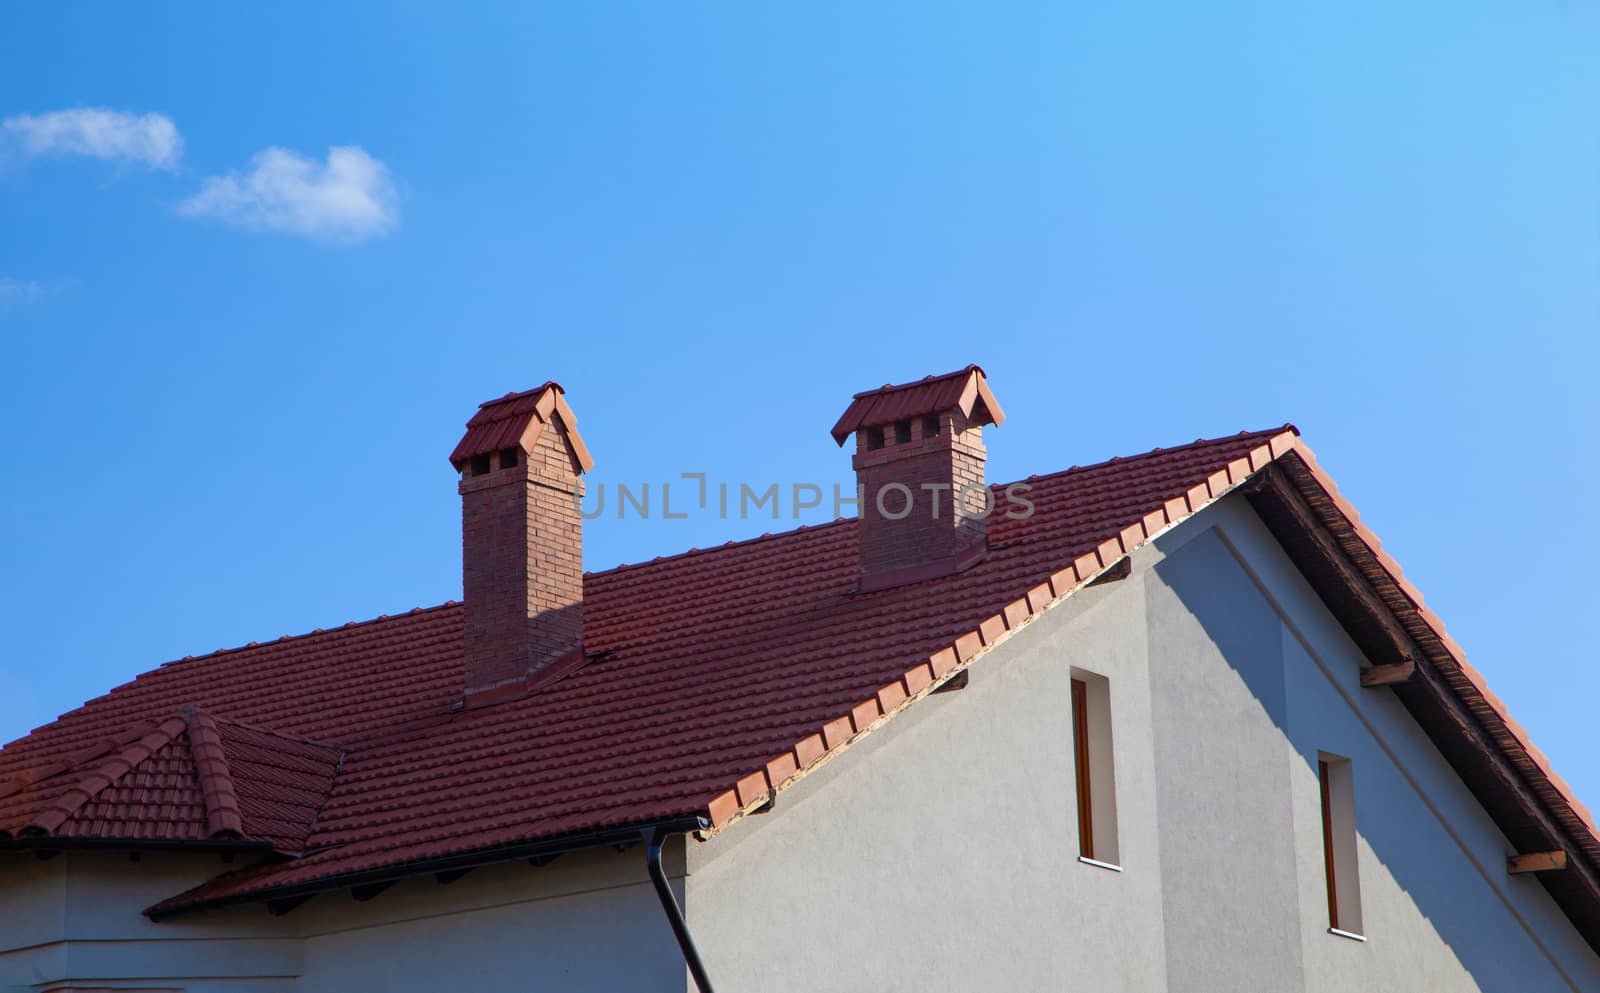 Chimneys on the roof of the house, against the blue sky by SlayCer